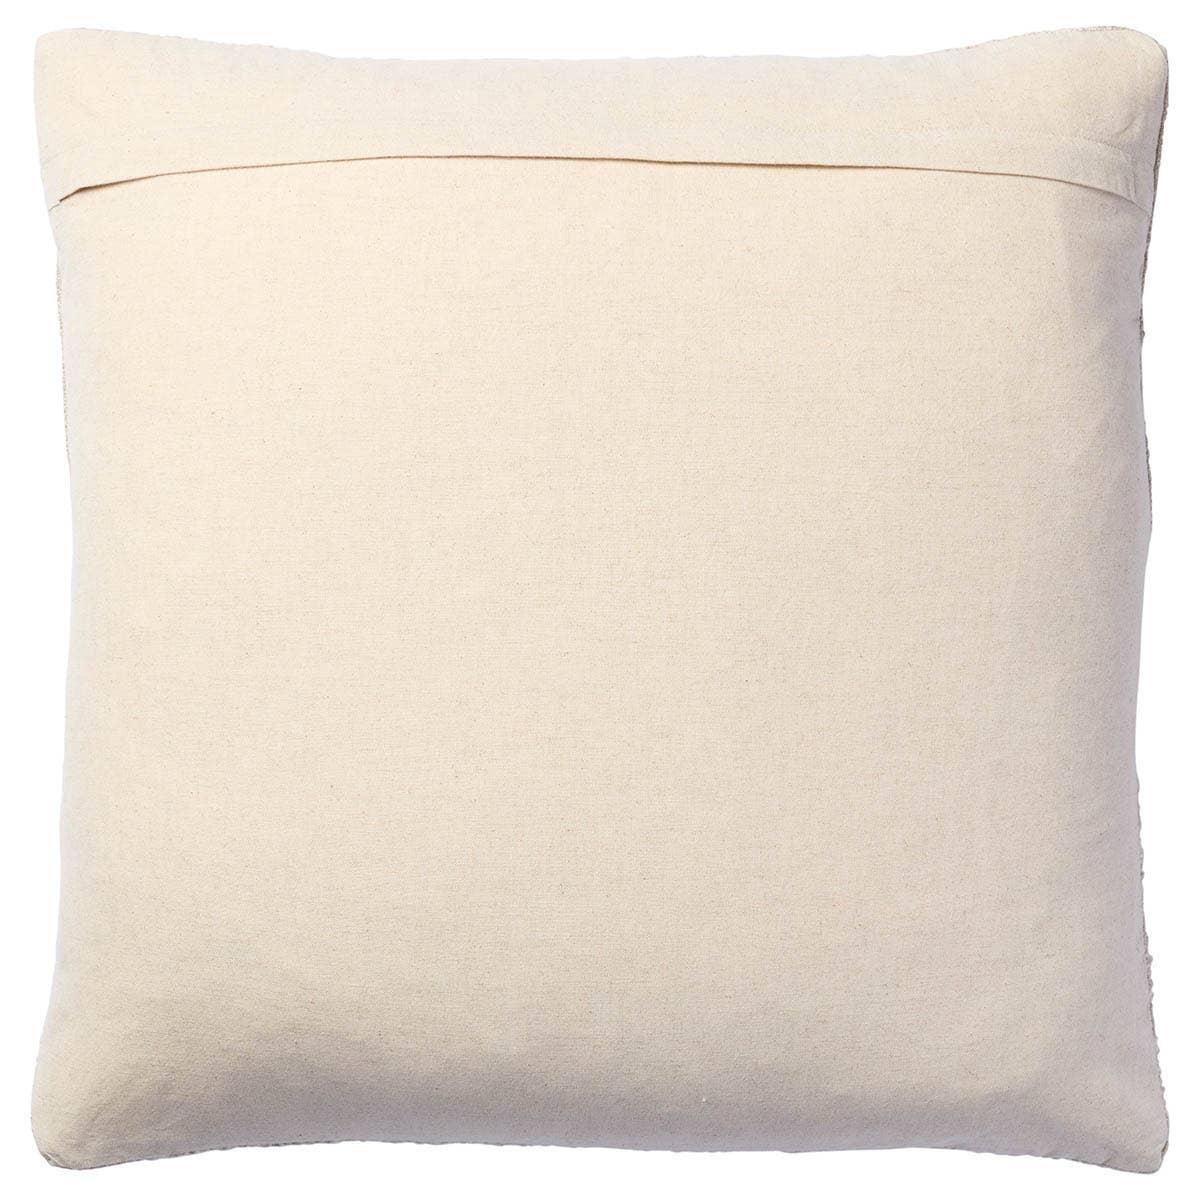 The handcrafted Novia pillow stuns with simple elegance. Full of texture yet soft to the touch, this cream and beige throw pillow suits any indoor space. The cotton, linen and viscose blend adds comfort while maintaining style.Indoor Pillow Amethyst Home provides interior design, new home construction design consulting, vintage area rugs, and lighting in the Park City metro area.